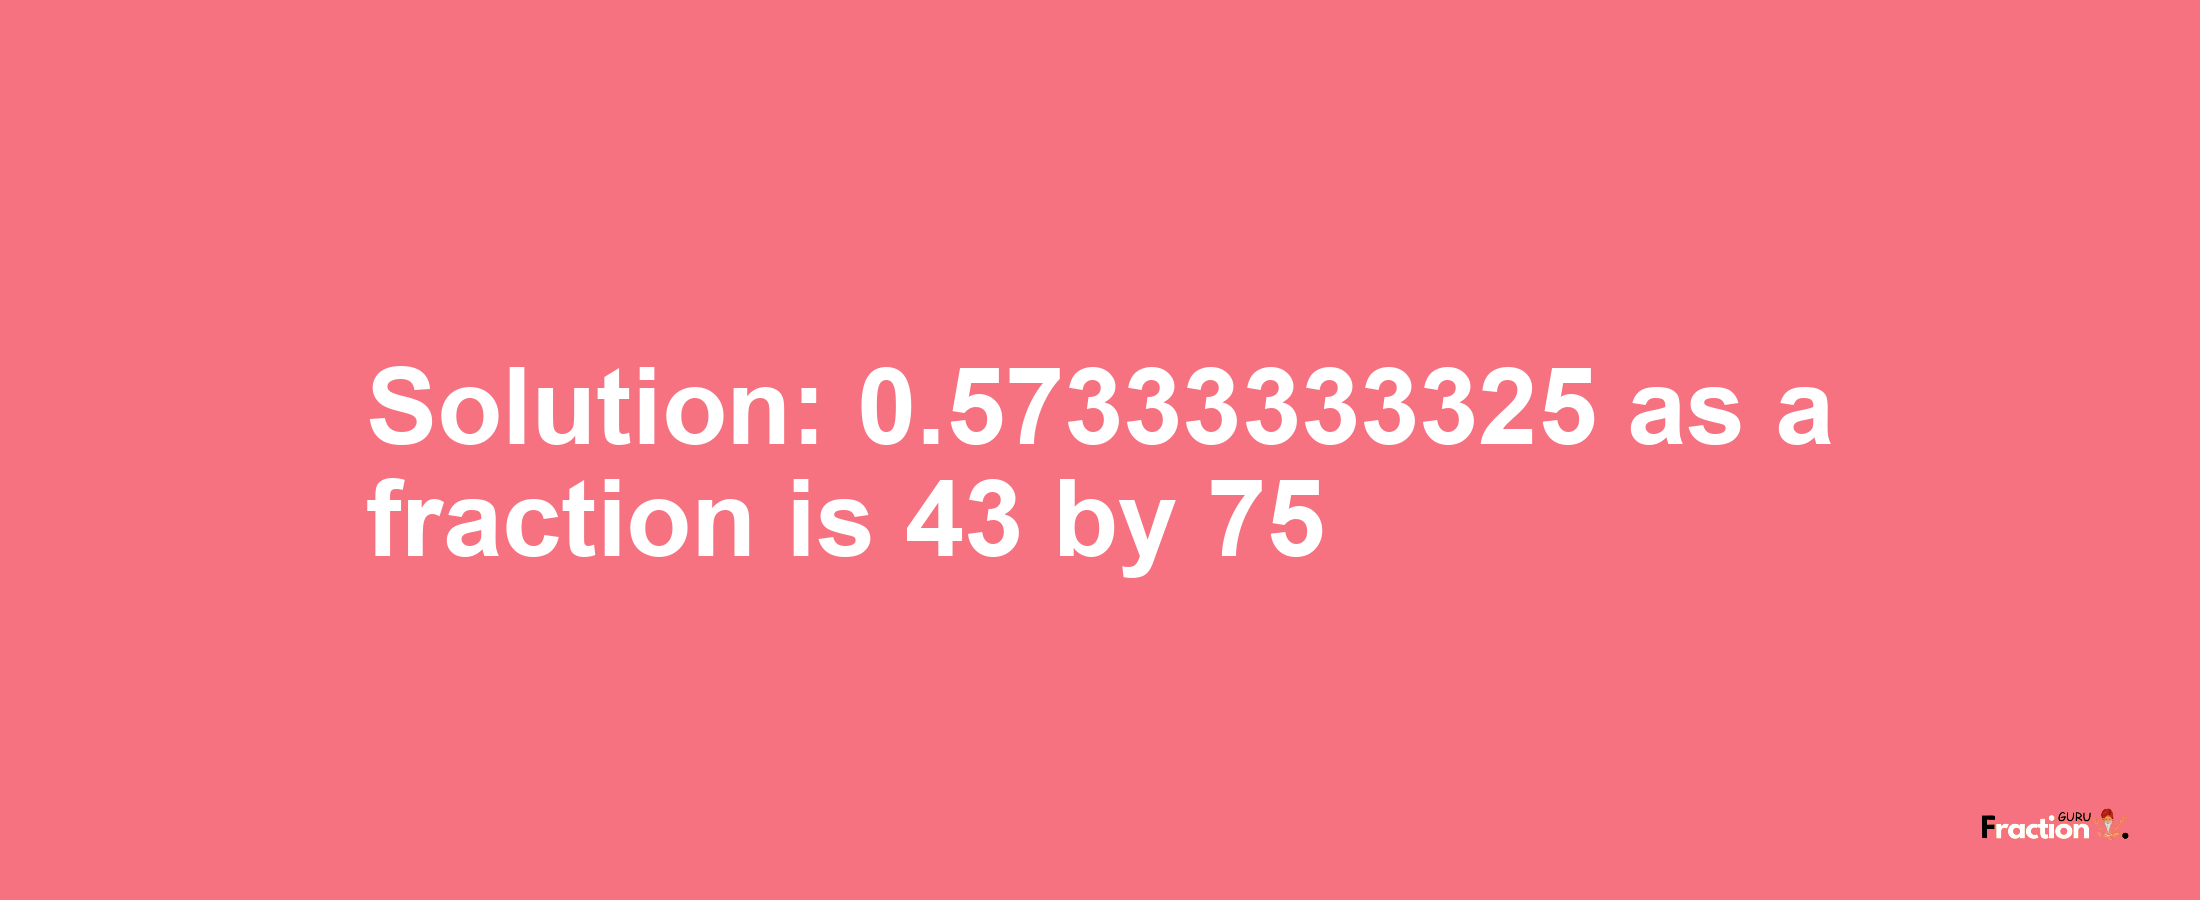 Solution:0.57333333325 as a fraction is 43/75